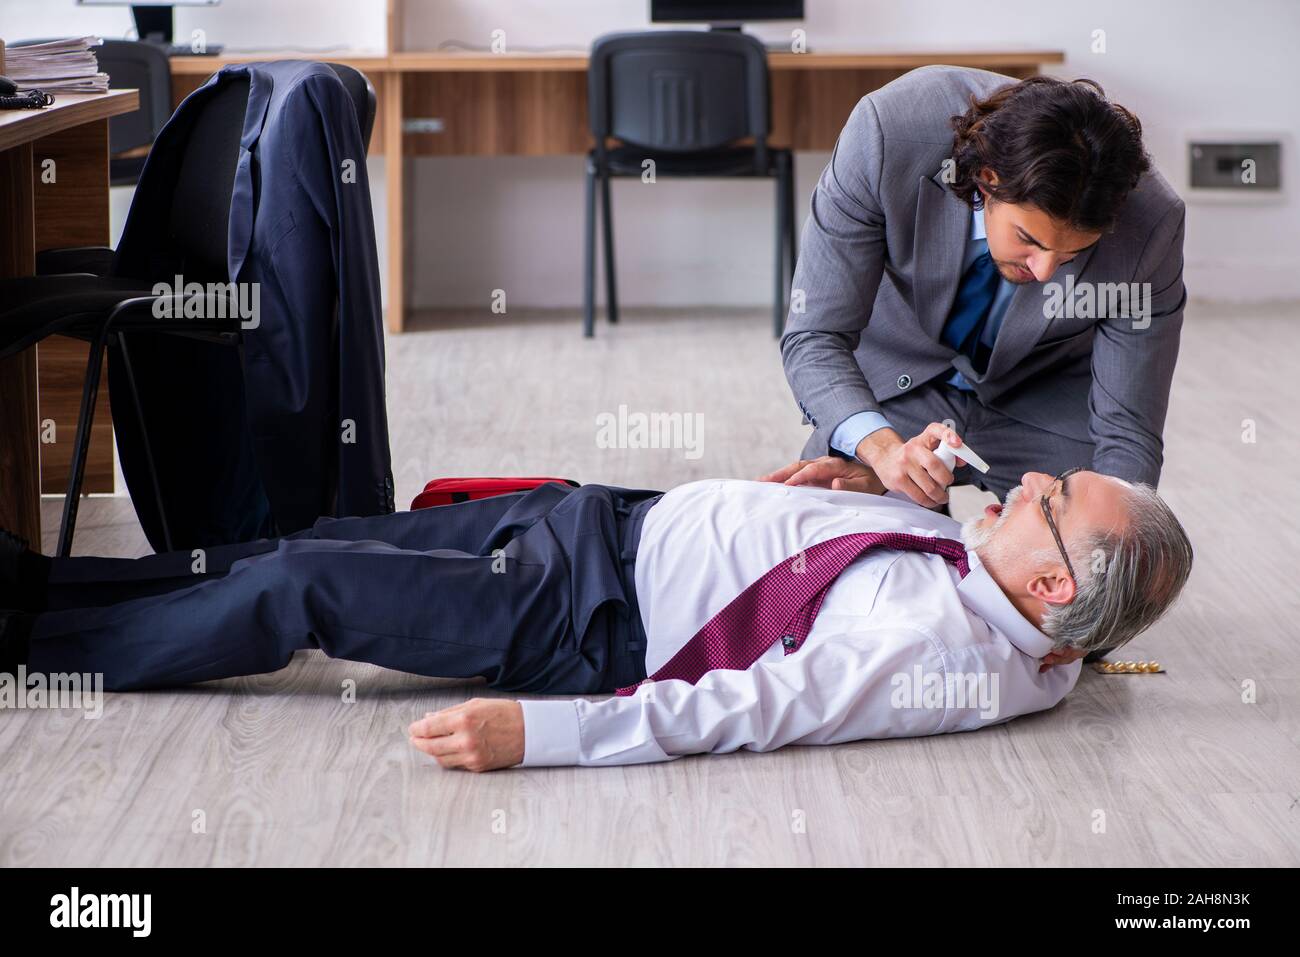 The male employee suffering from heart attack in the office Stock Photo